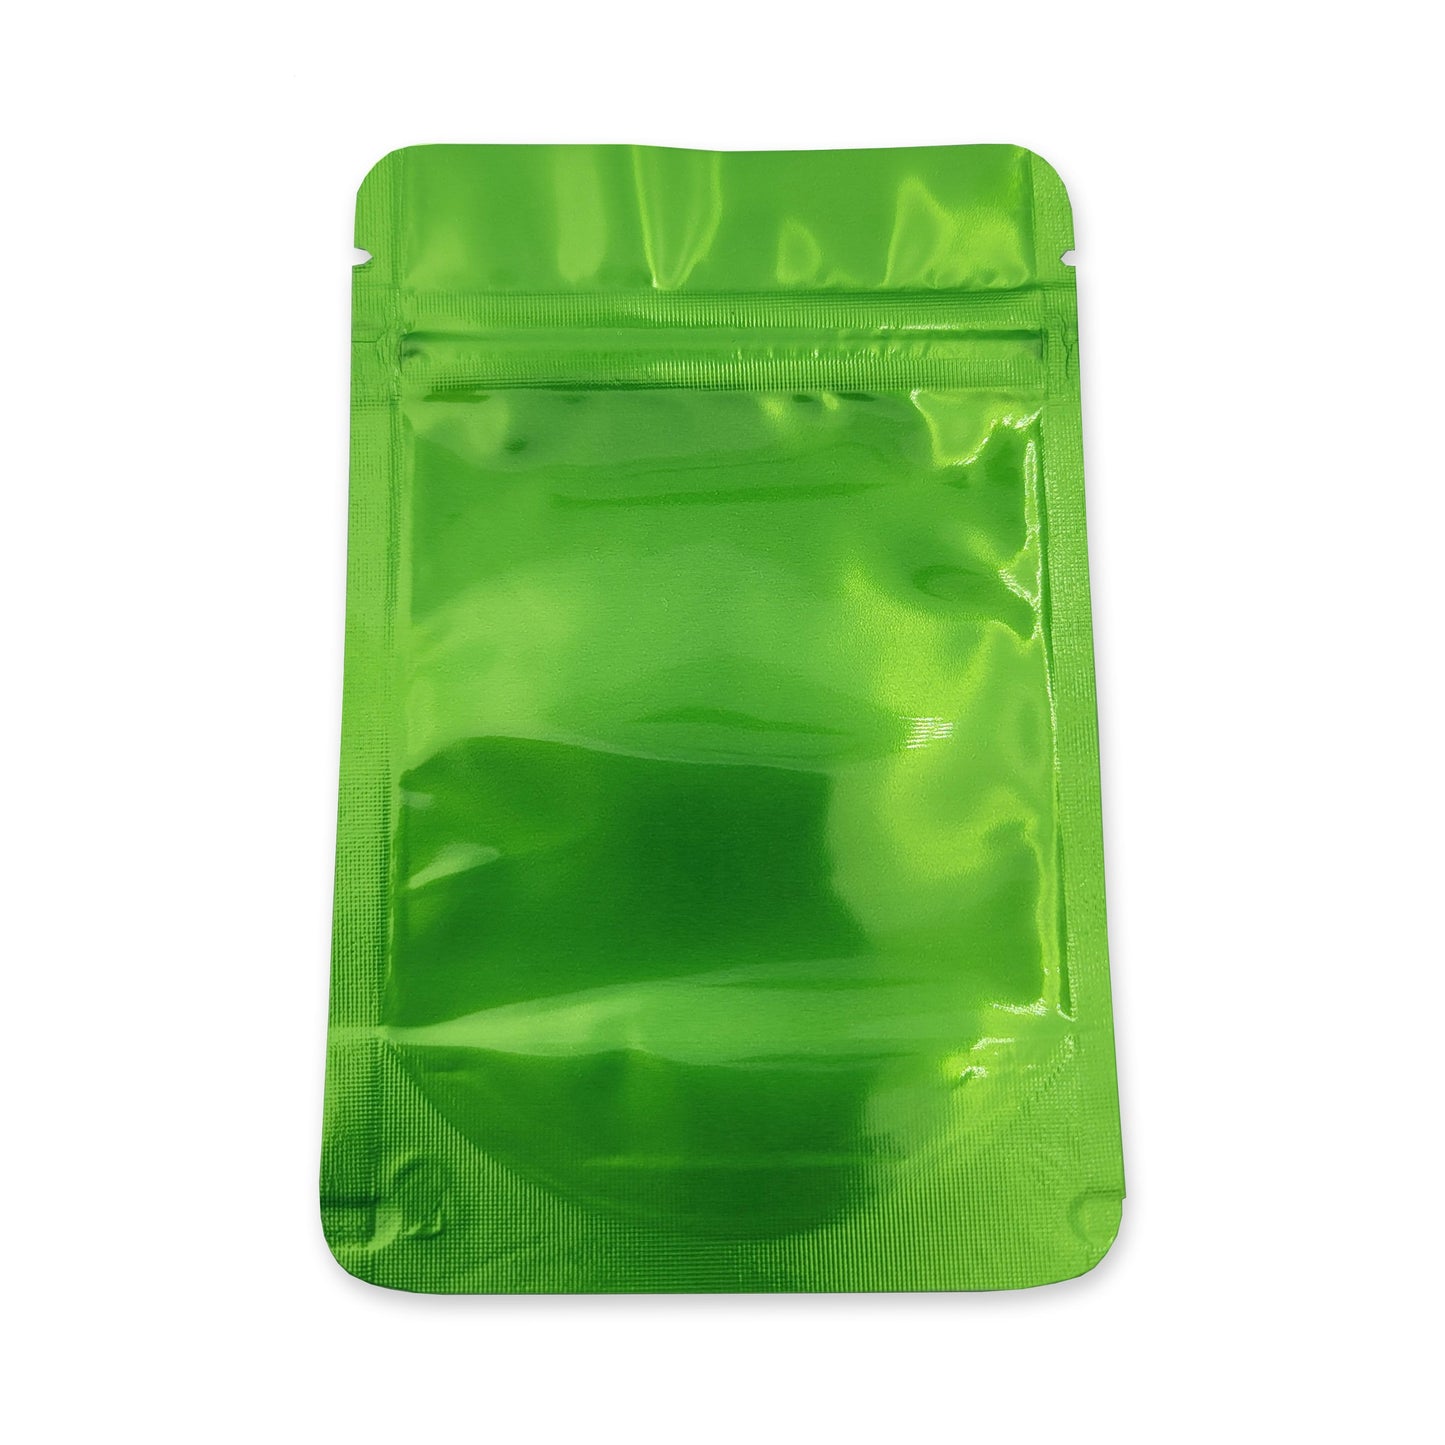 Shiny Series Smell Proof Bag (1/8th) 5.0" x 3.3" Green